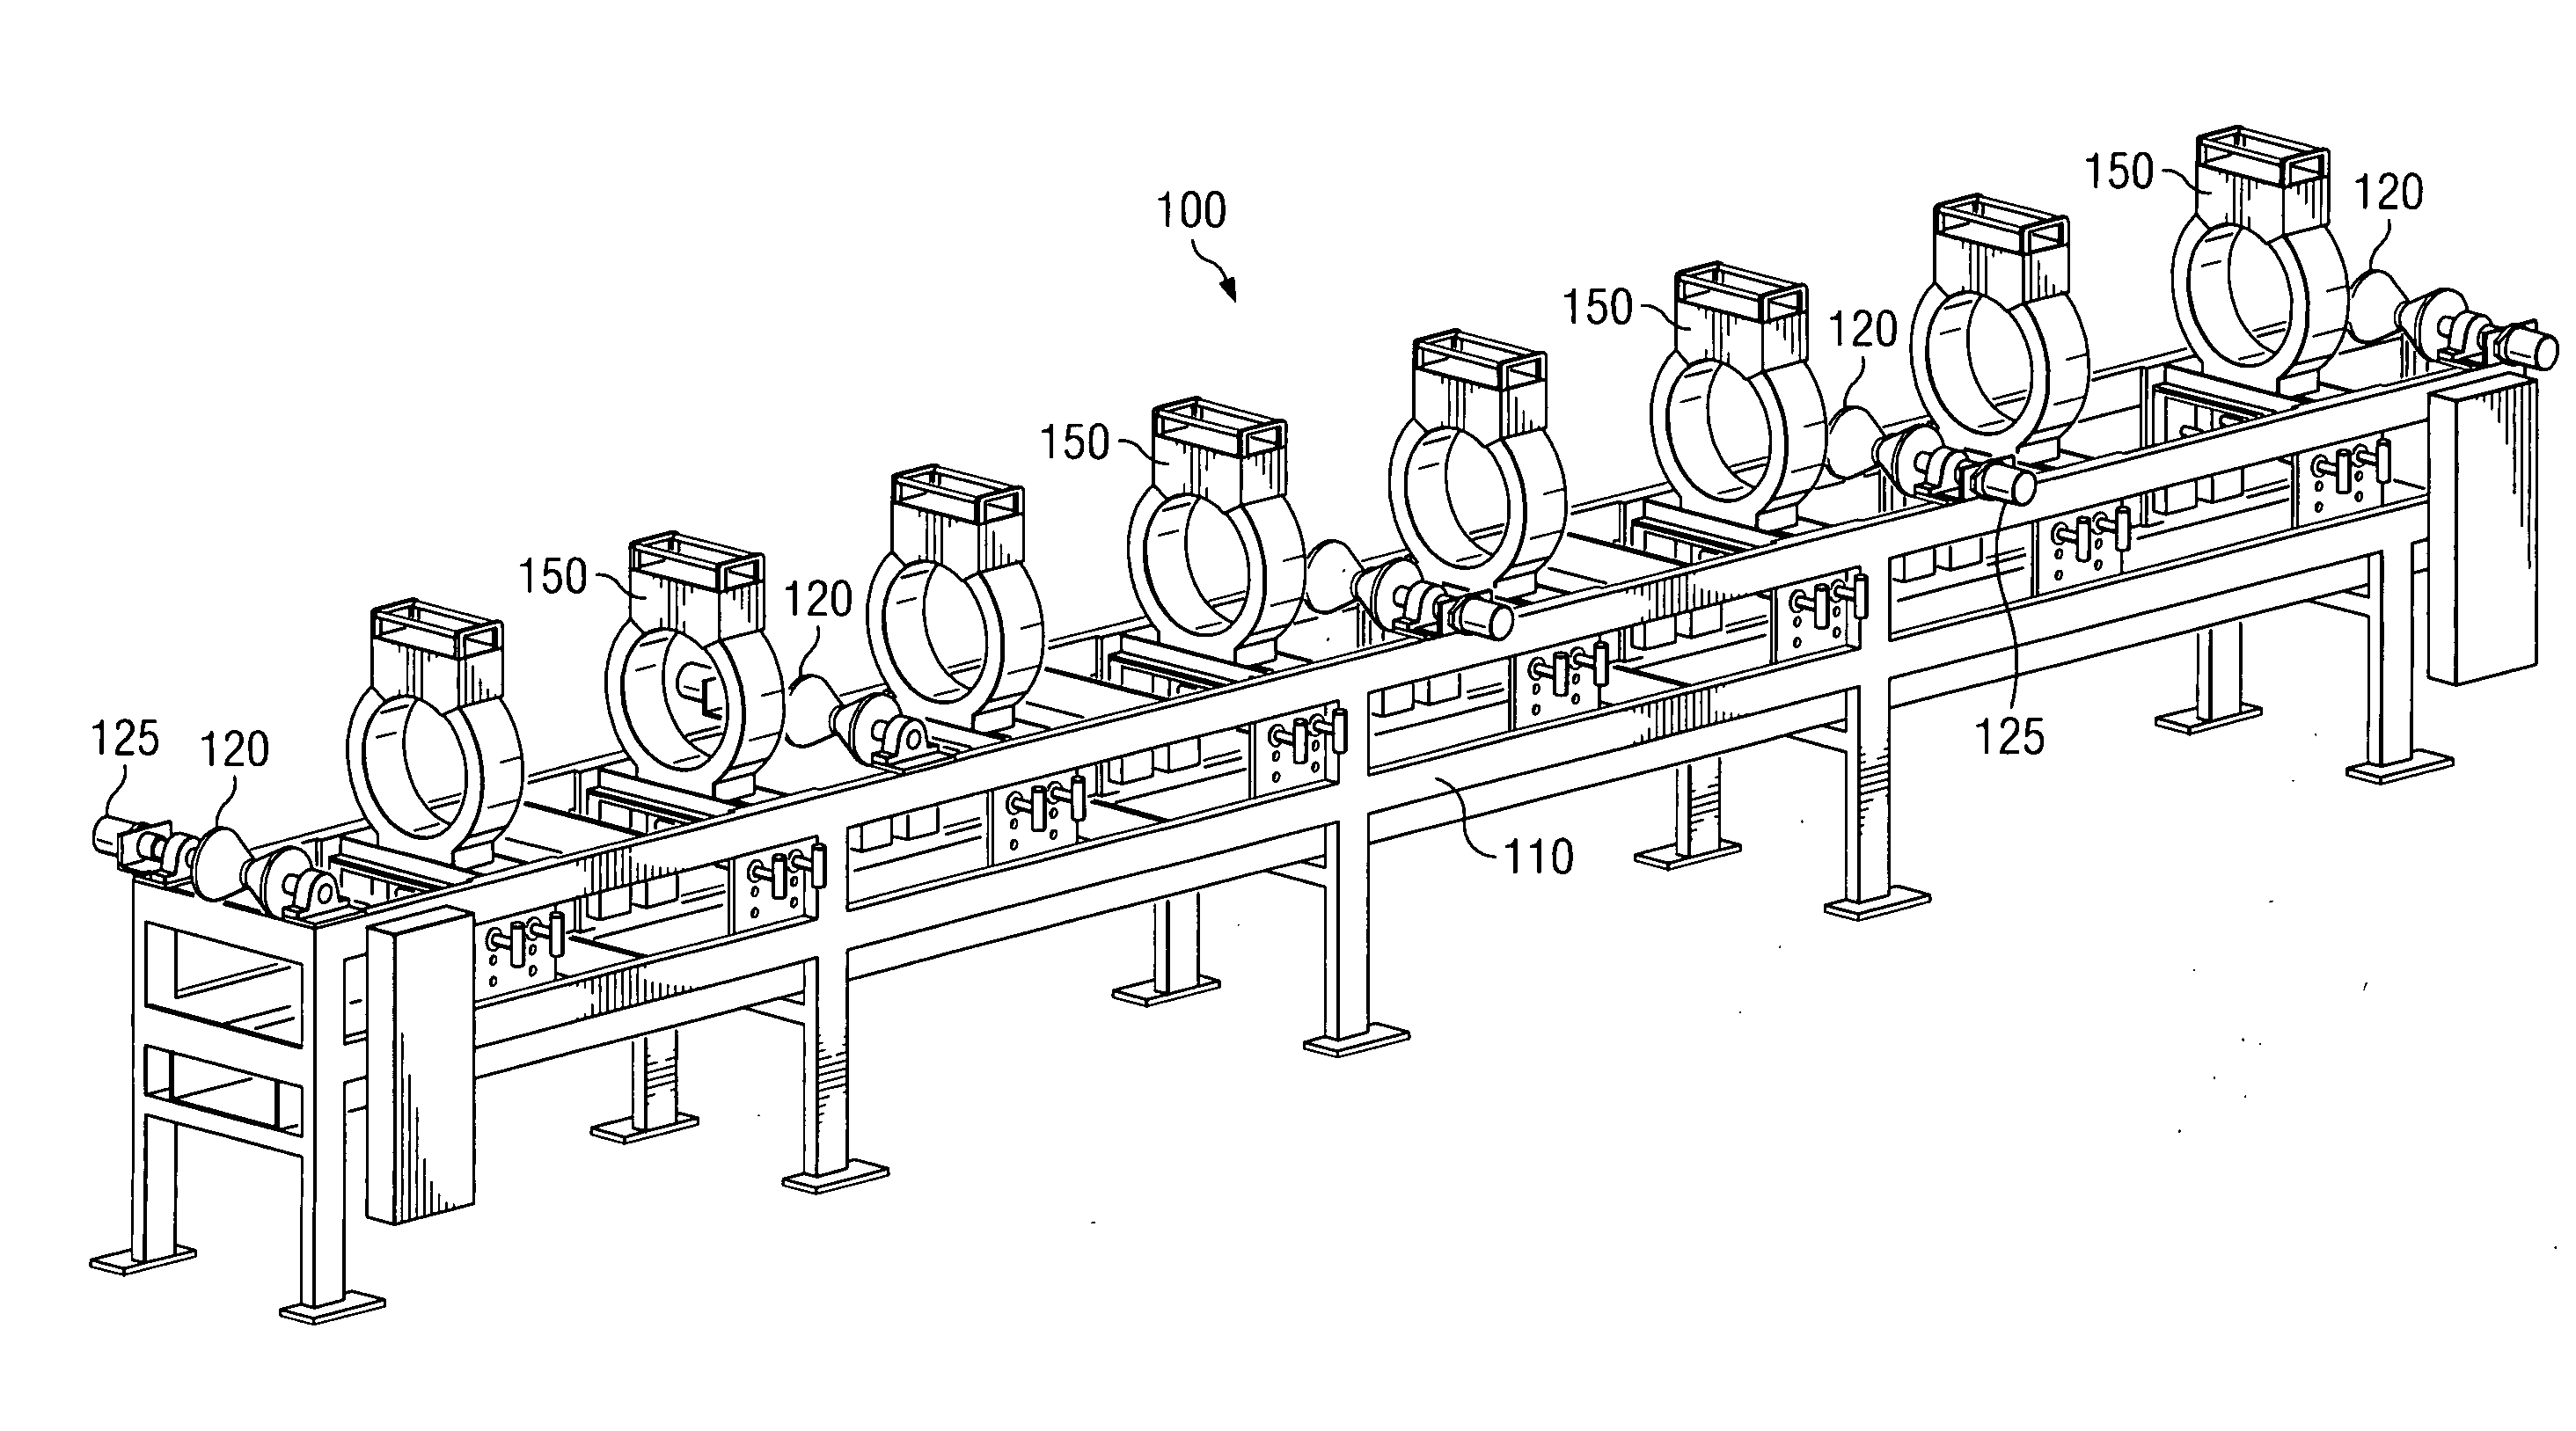 Apparatus and method for magnetizing casing string tubulars